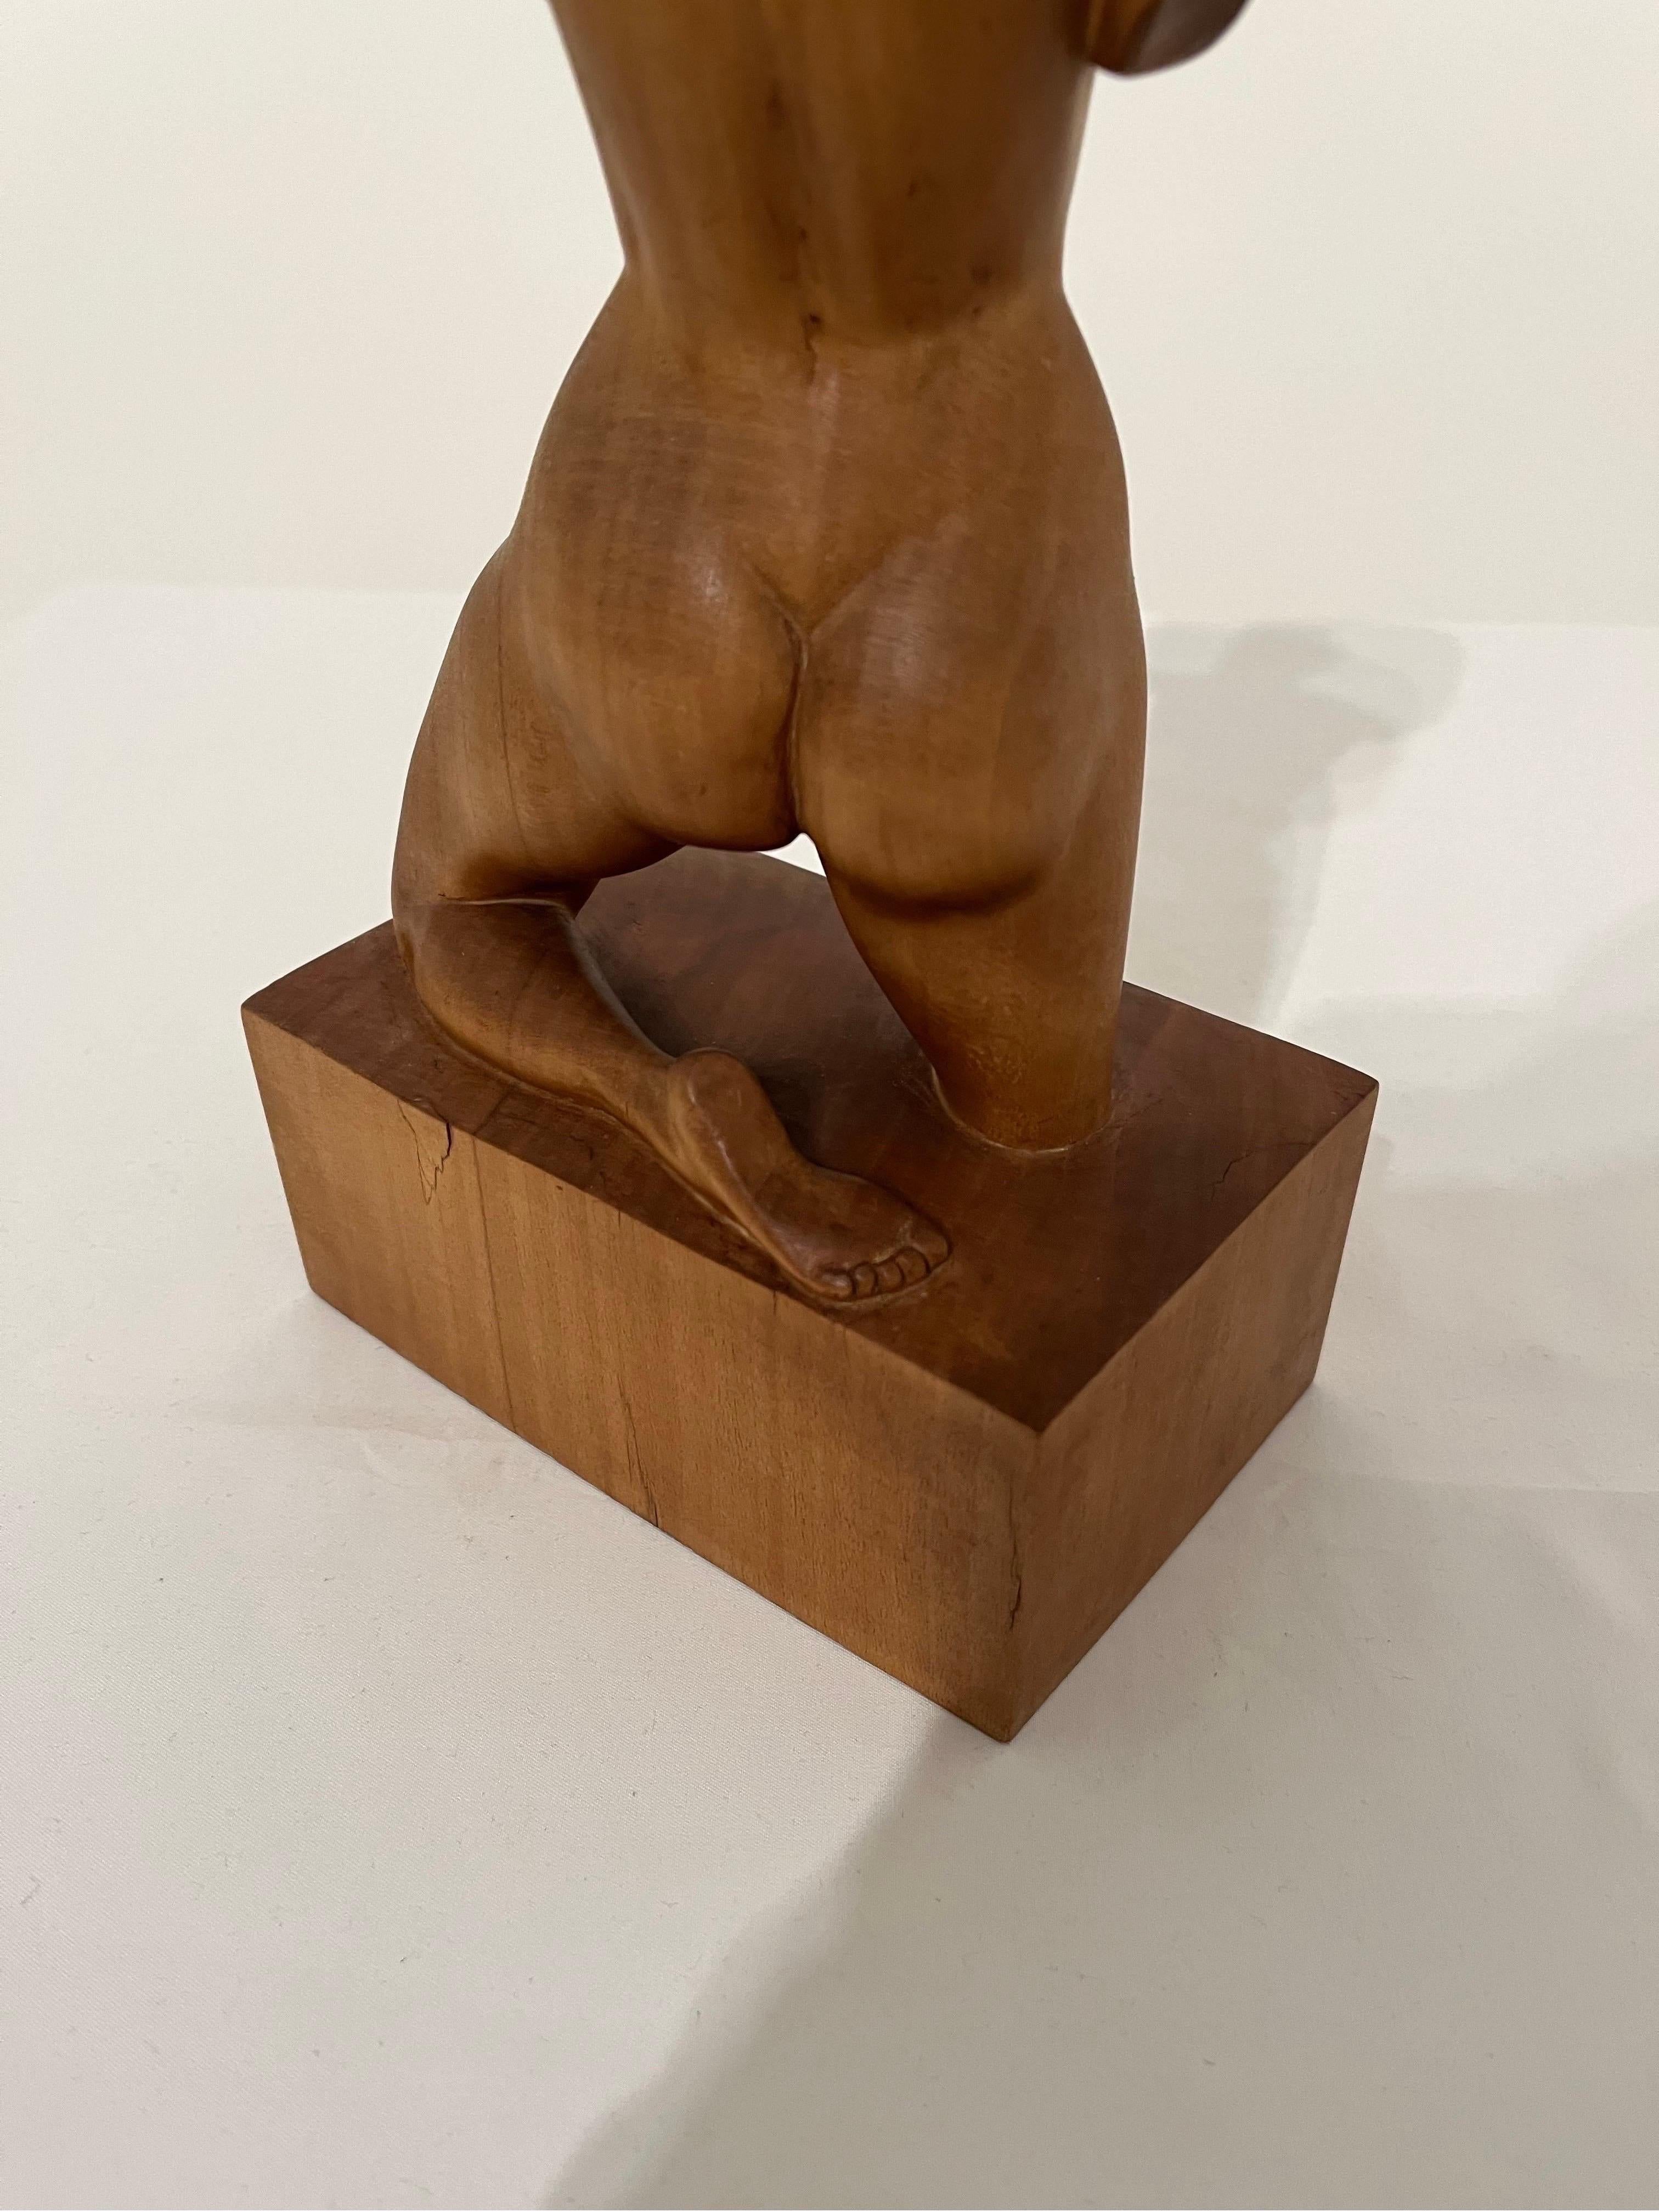 Female Nude Figure Bust Wood Carving 1960s sculpture  For Sale 1